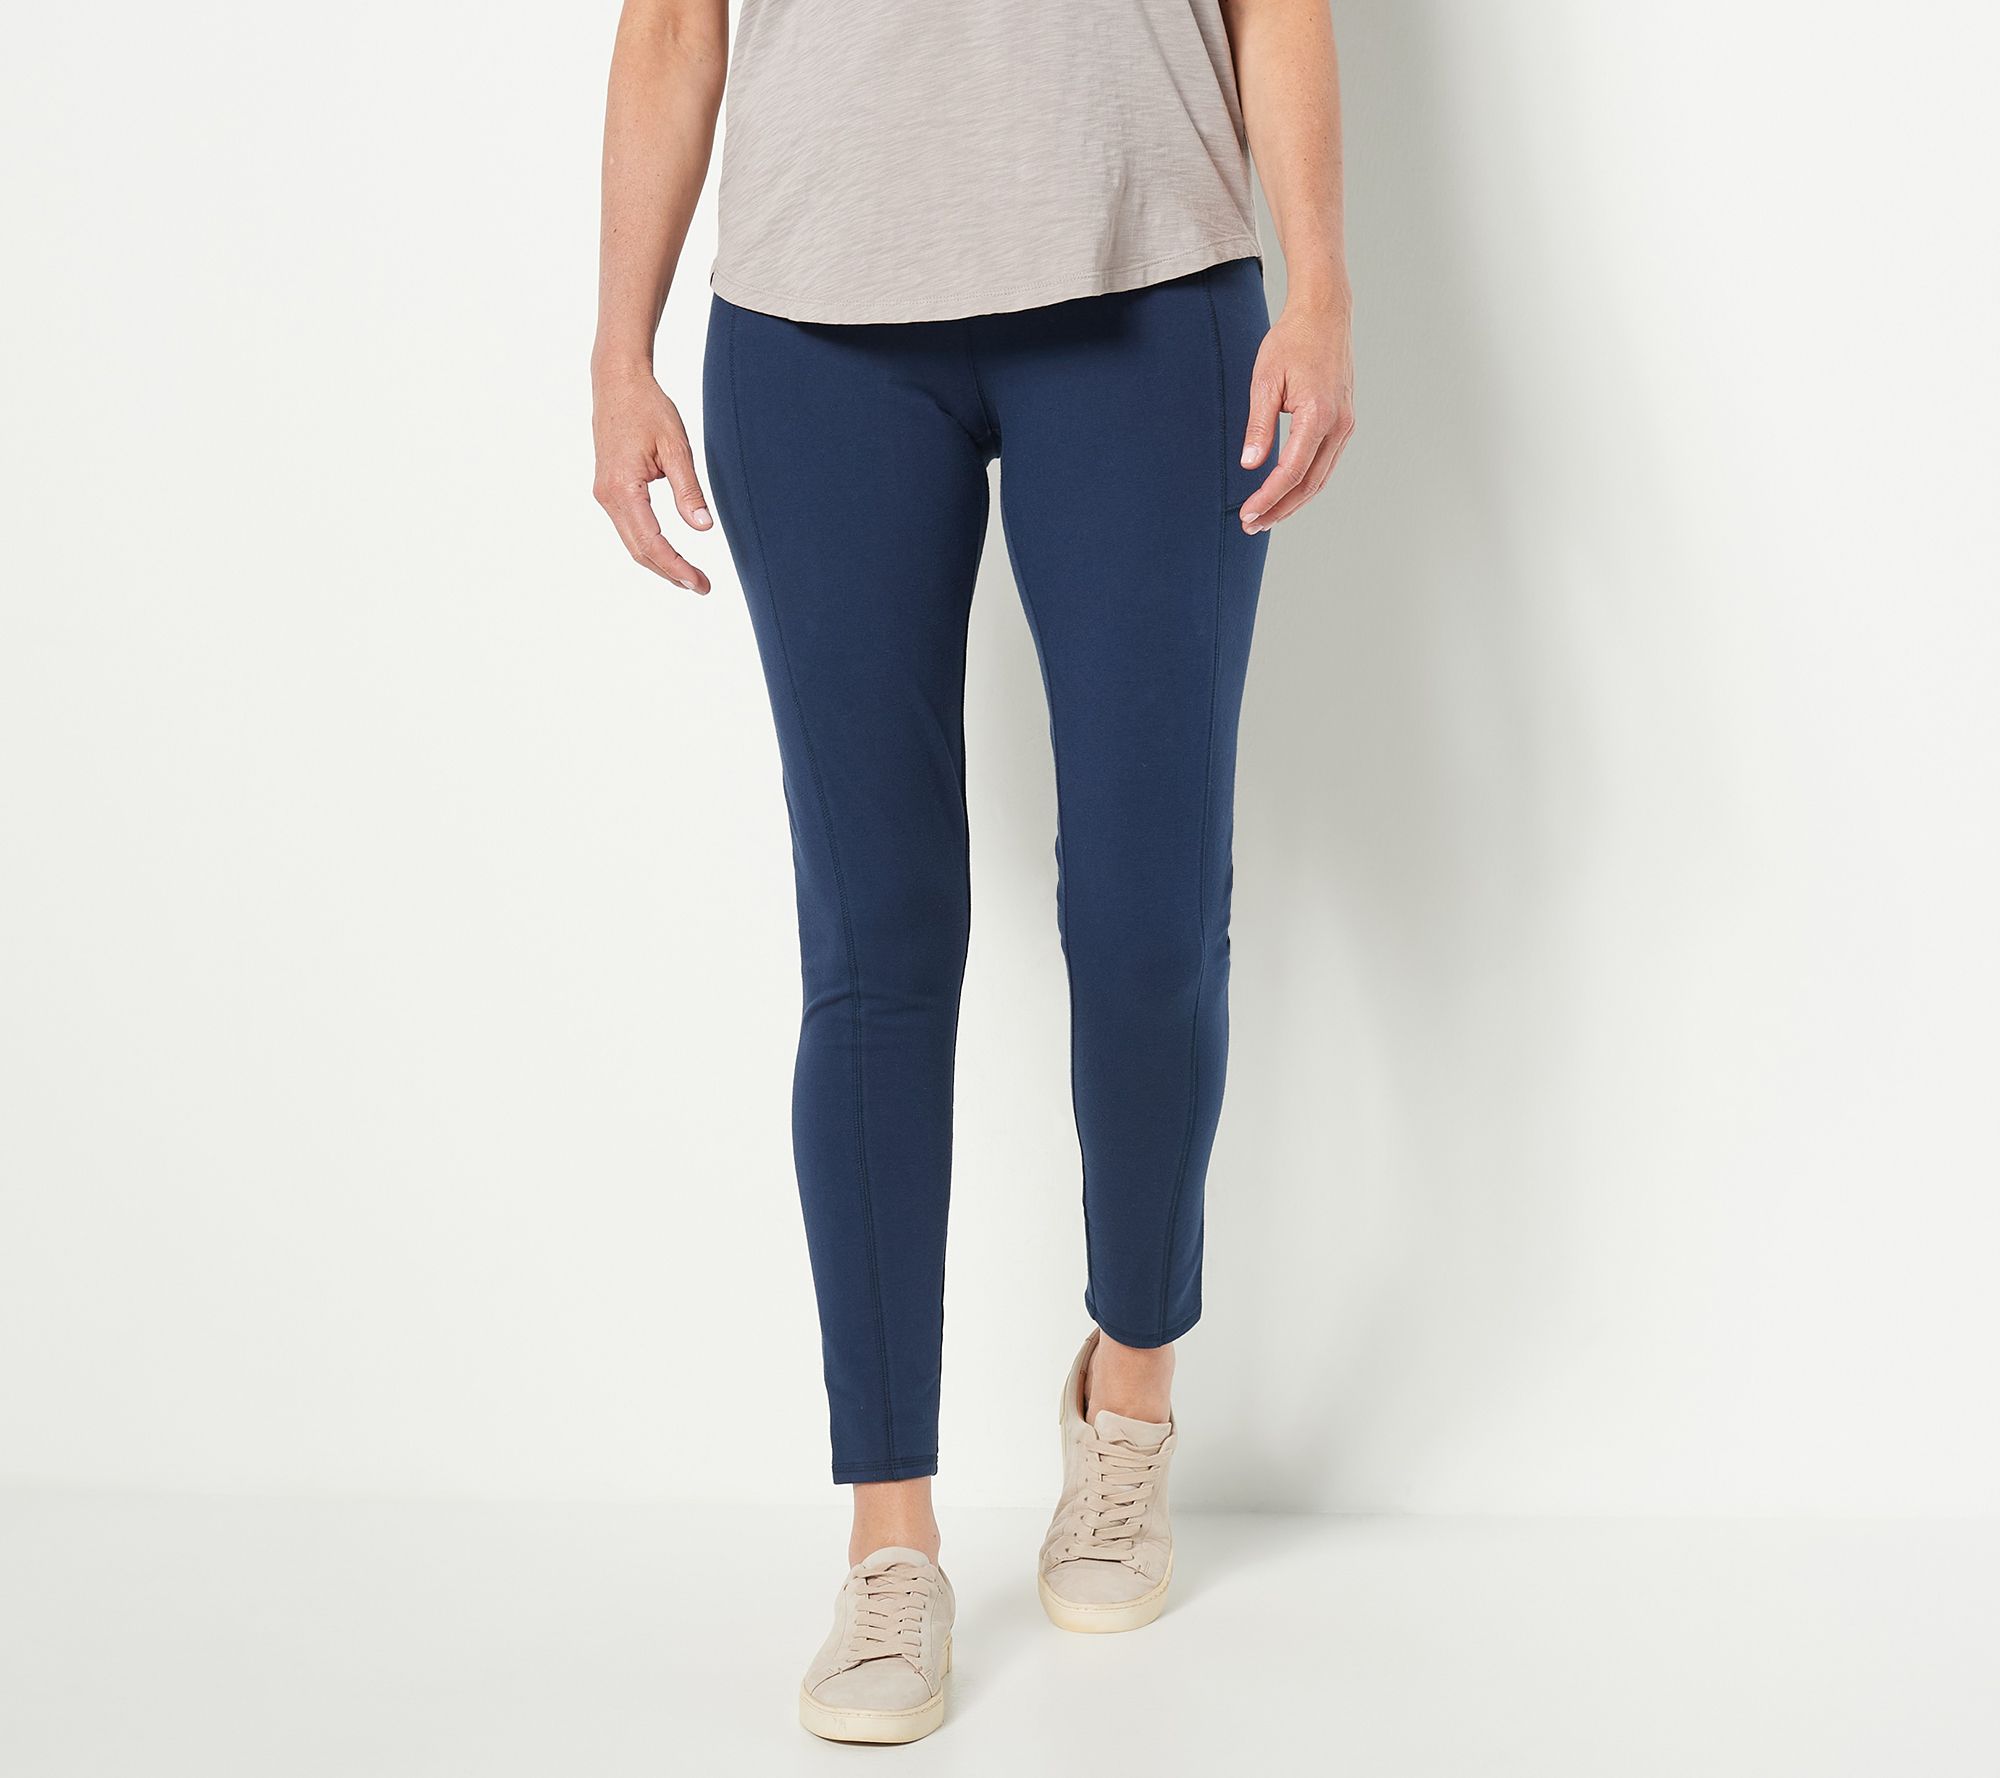 Denim & Co. Active Petite Duo Stretch Pant with Side Pocket 